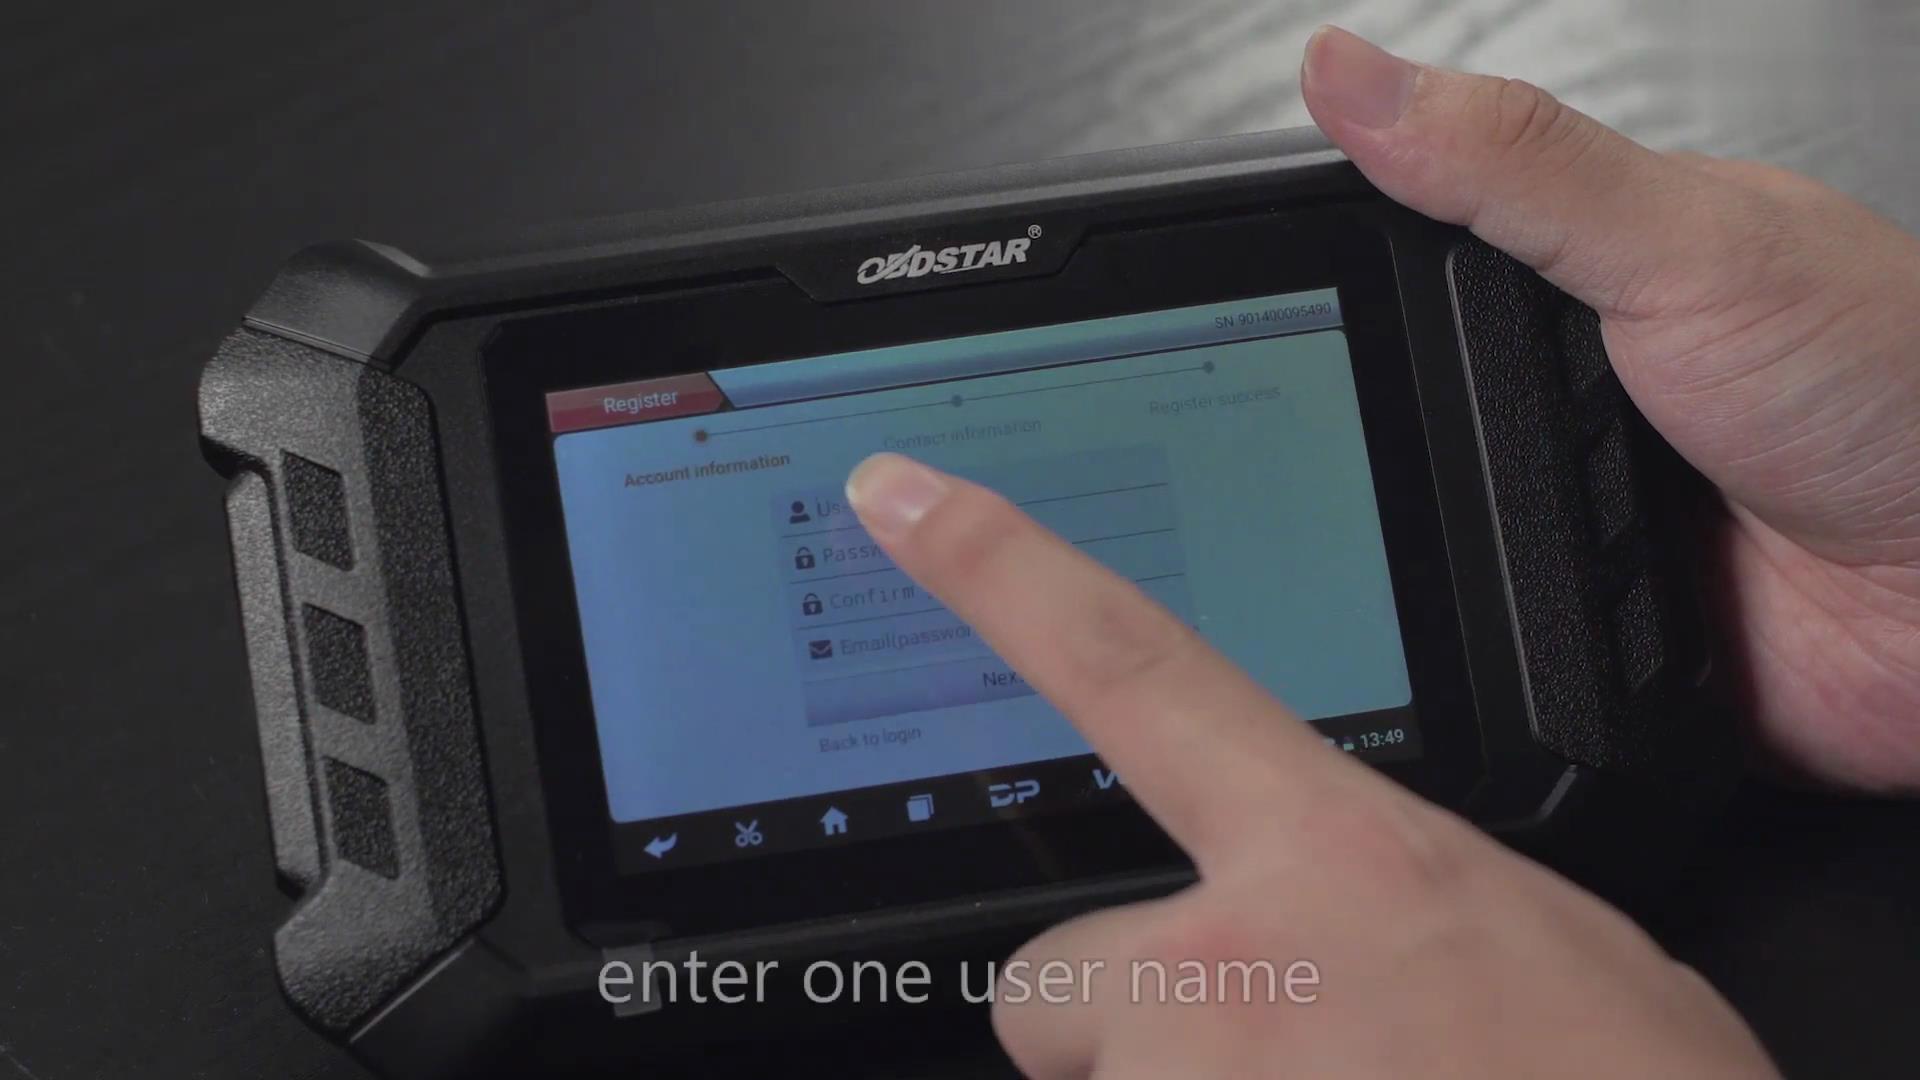 How-to-Register-&-Upgrade-Obdstar-X300-MINI-Scan-Tool-3